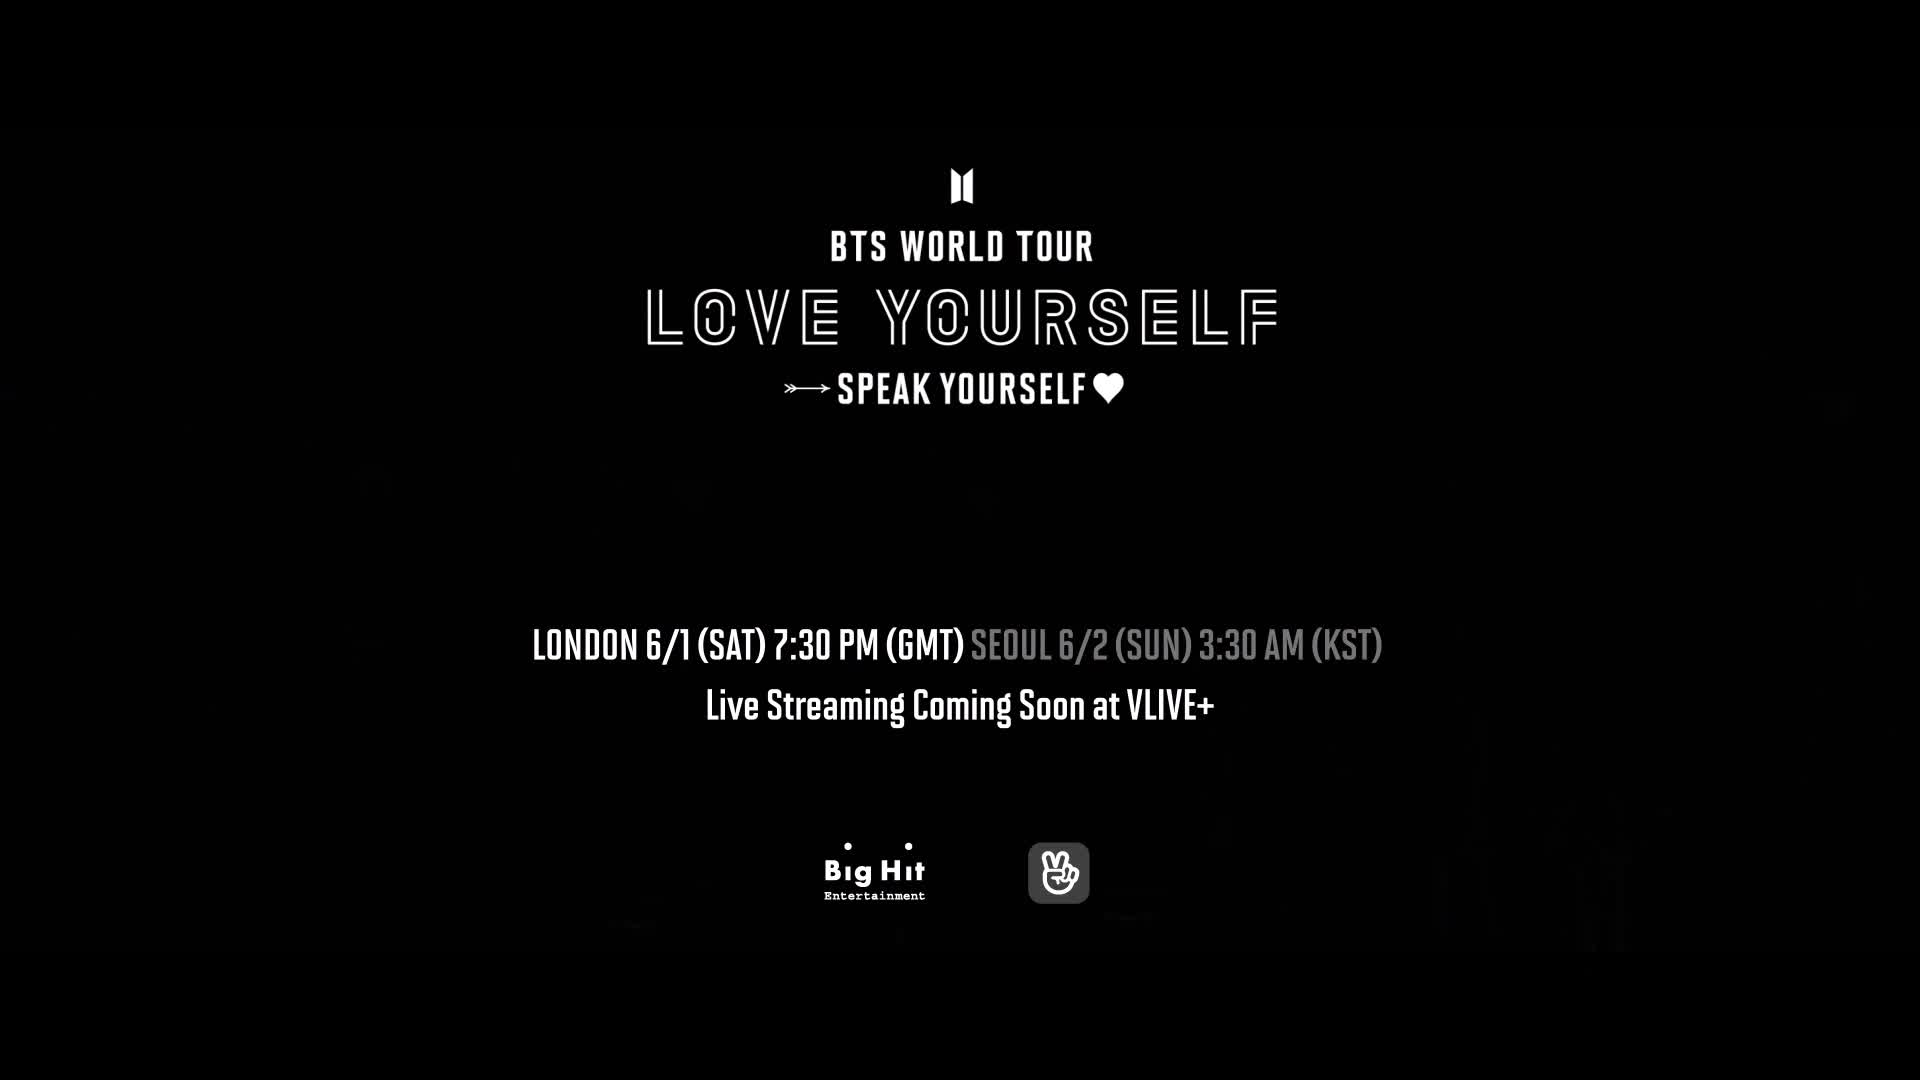 BTS WORLD TOUR 'LOVE YOURSELF: SPEAK YOURSELF' in Wembley Stadium VLIVE+ Coming Soon